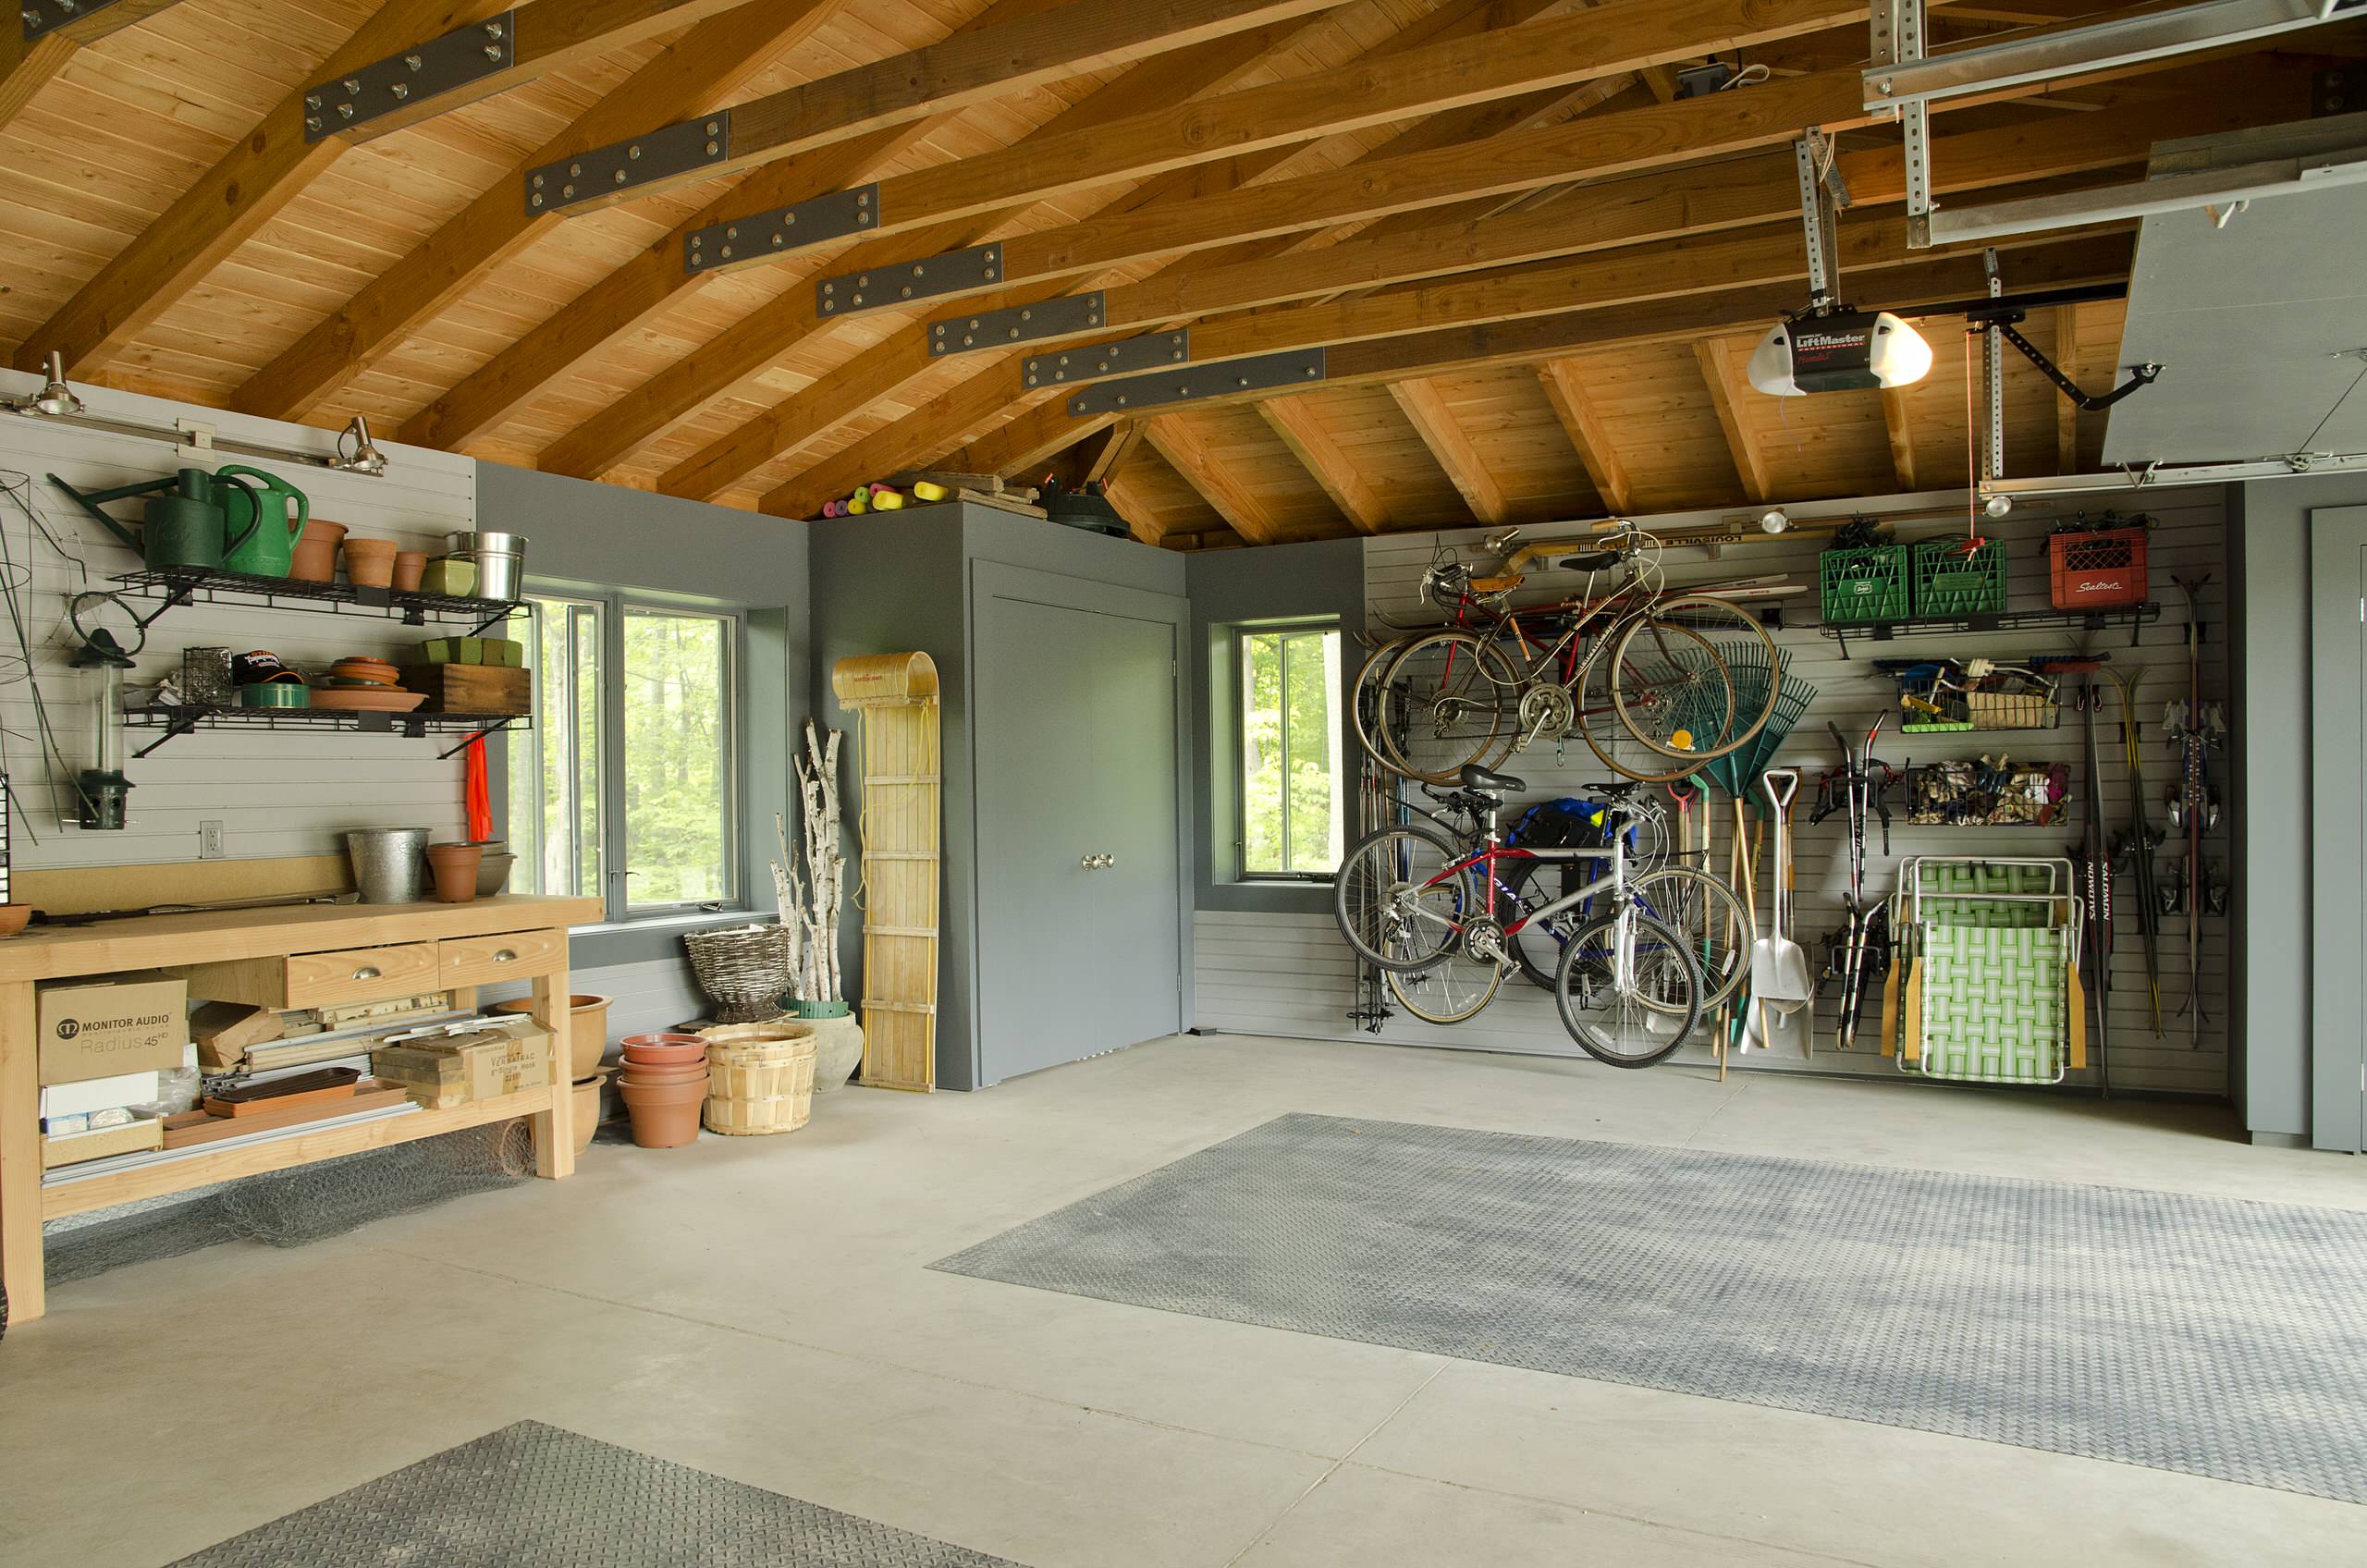 Garage Design Ideas Garage Design Ideas Design Ideas And Photos | My ...